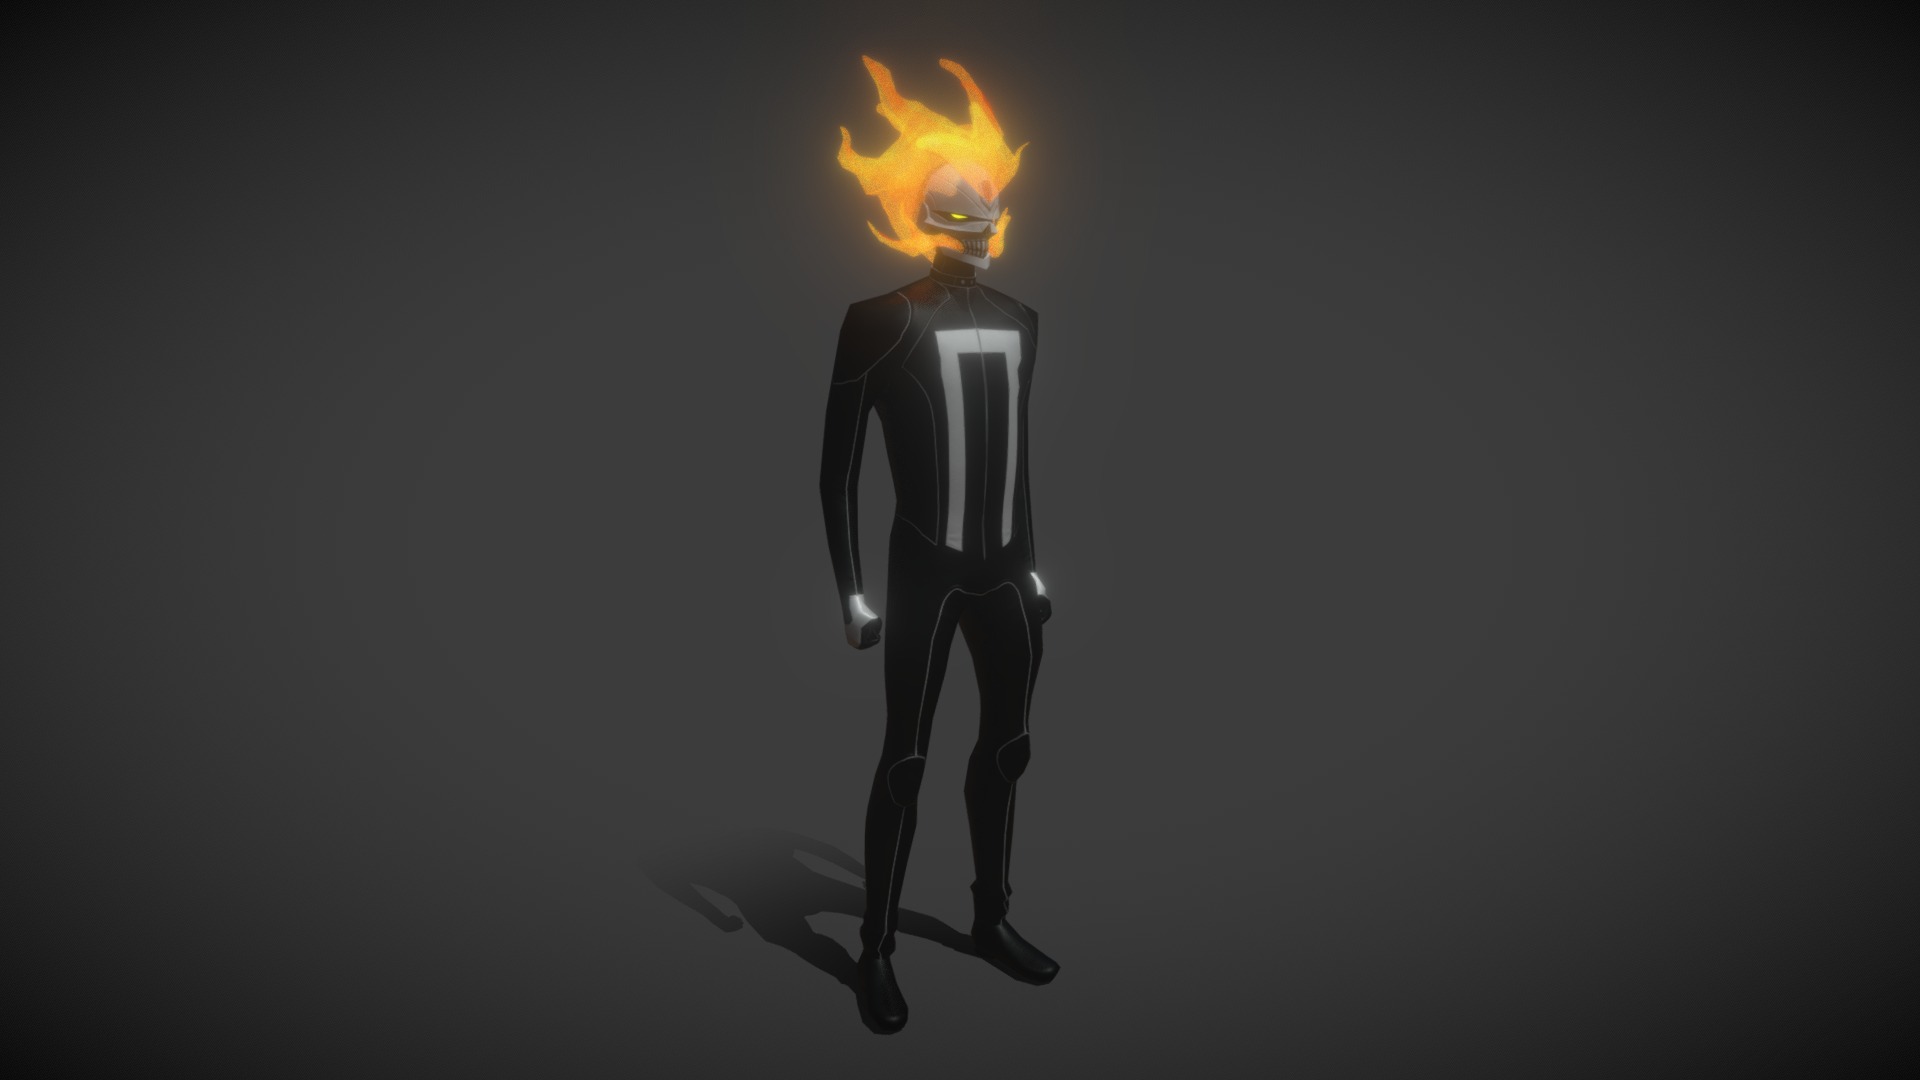 Ghost Rider animated.

All the 3D modeling I’ve made on Maya 2018.

The texture was made on Photoshop.

The Normal Map was made on Substance Painter.





Content files:

Maya file.

FBX

OBJ

Textures
 - Ghost Rider (Robbie Reyes) 3d model